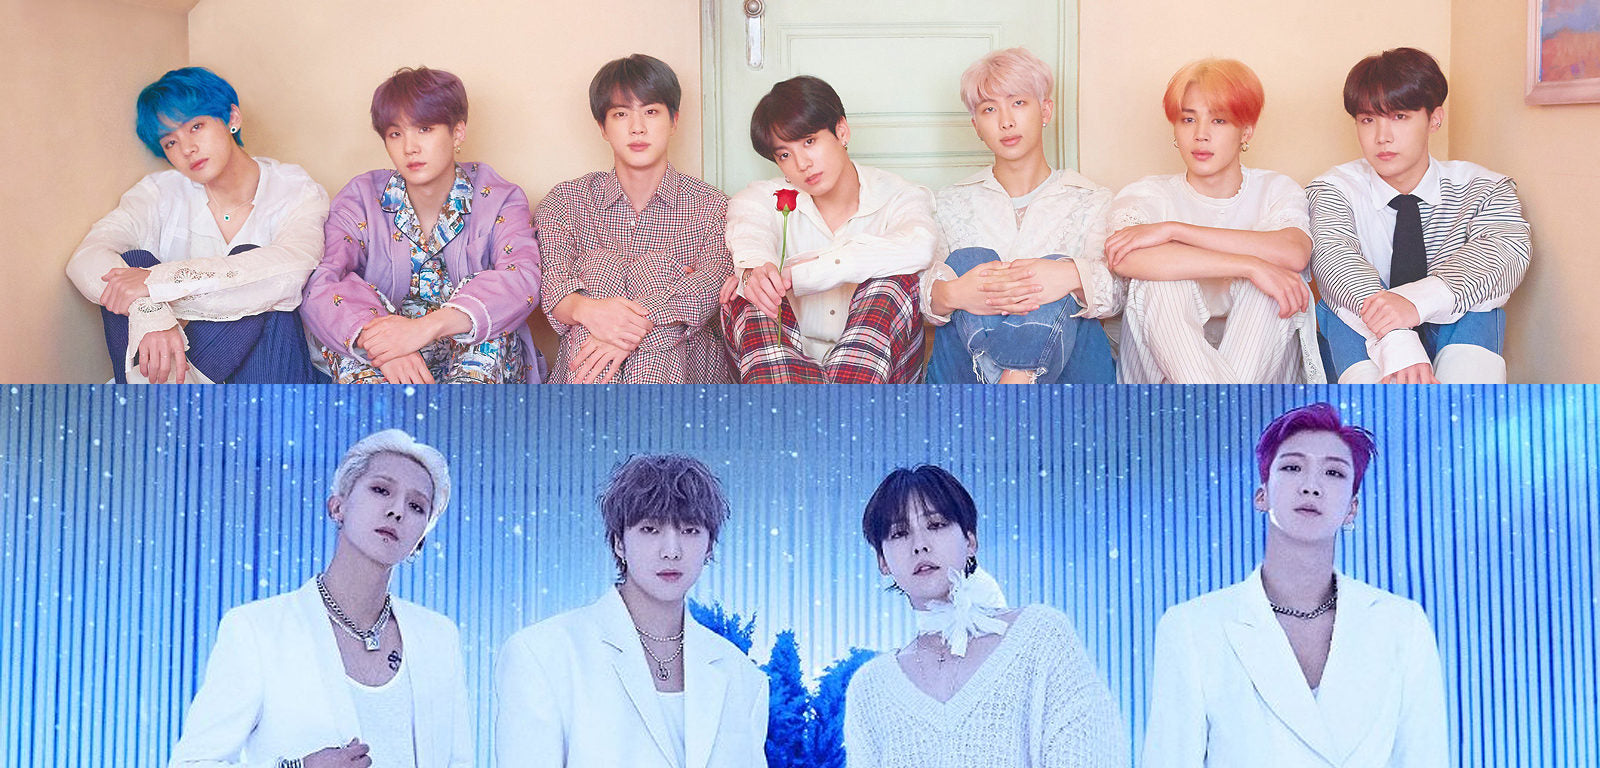 The most downloaded Kpop male band songs in 2019? - Kpopshop